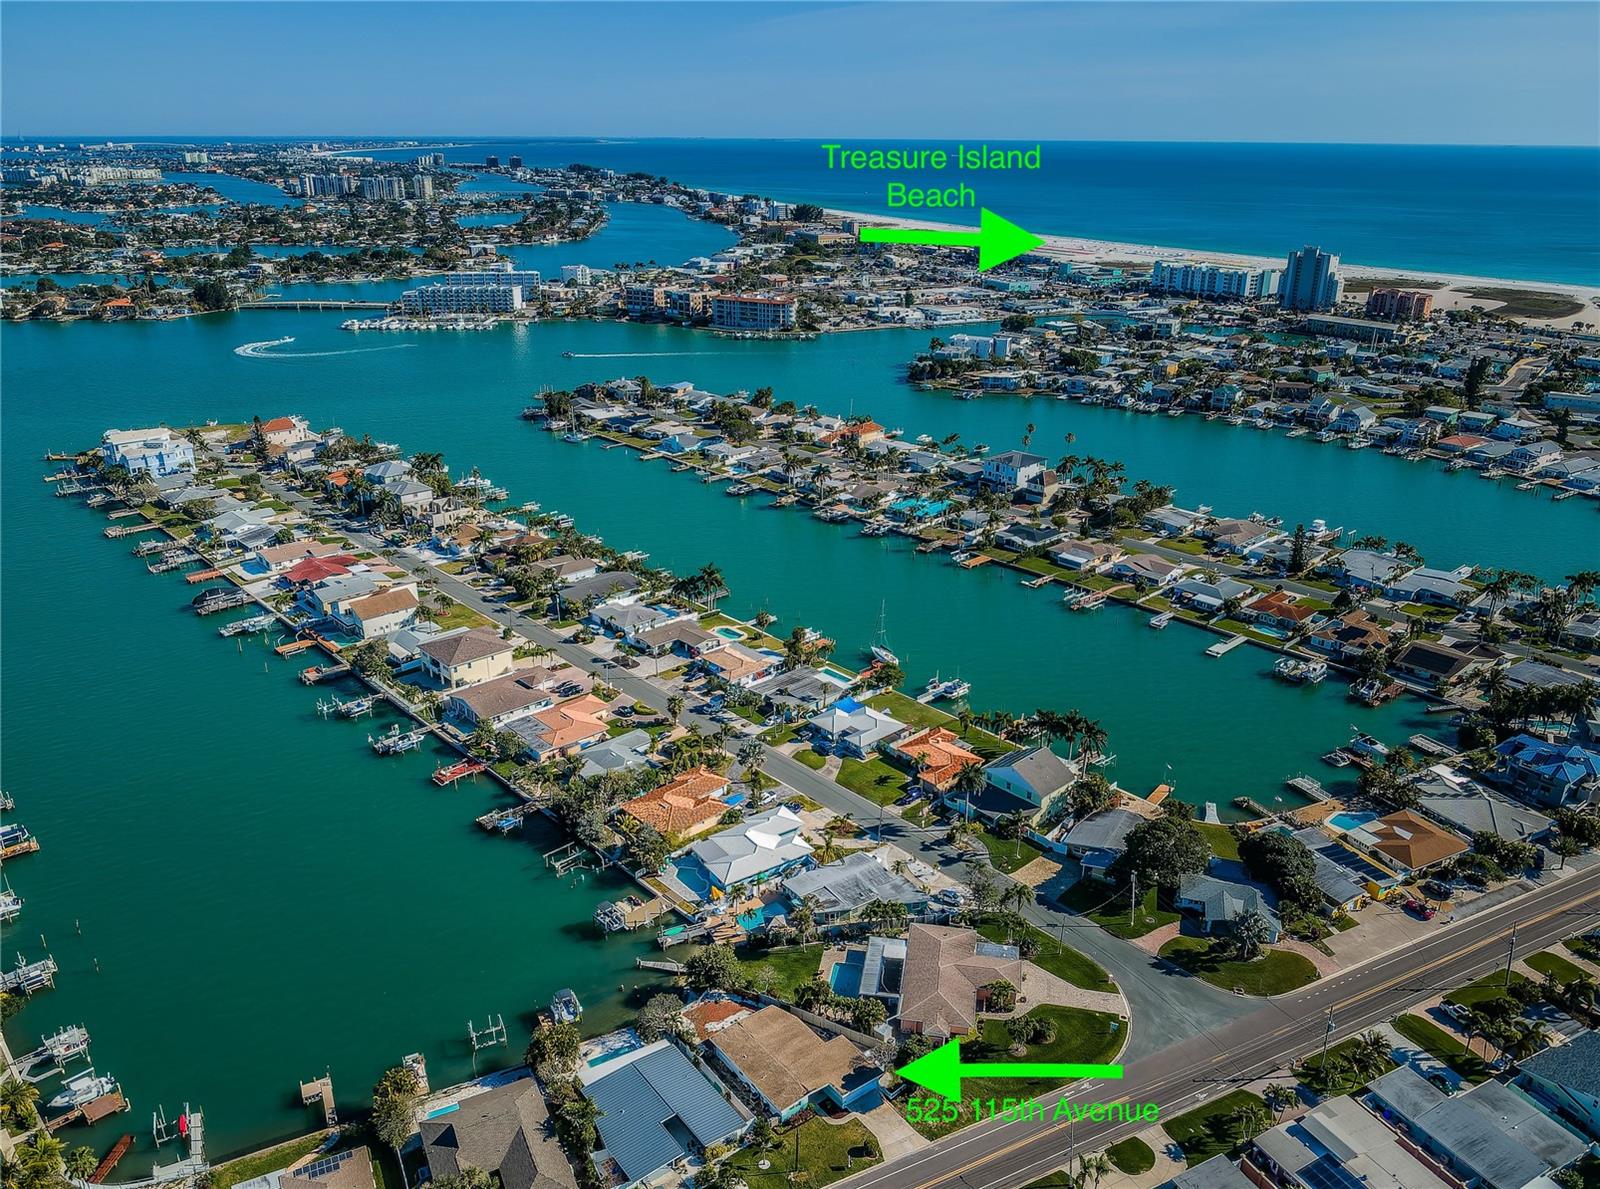 Waterfront & Renovated 2 Bed/ 2 Bath Home on Treasure Island - Minutes to Beach!